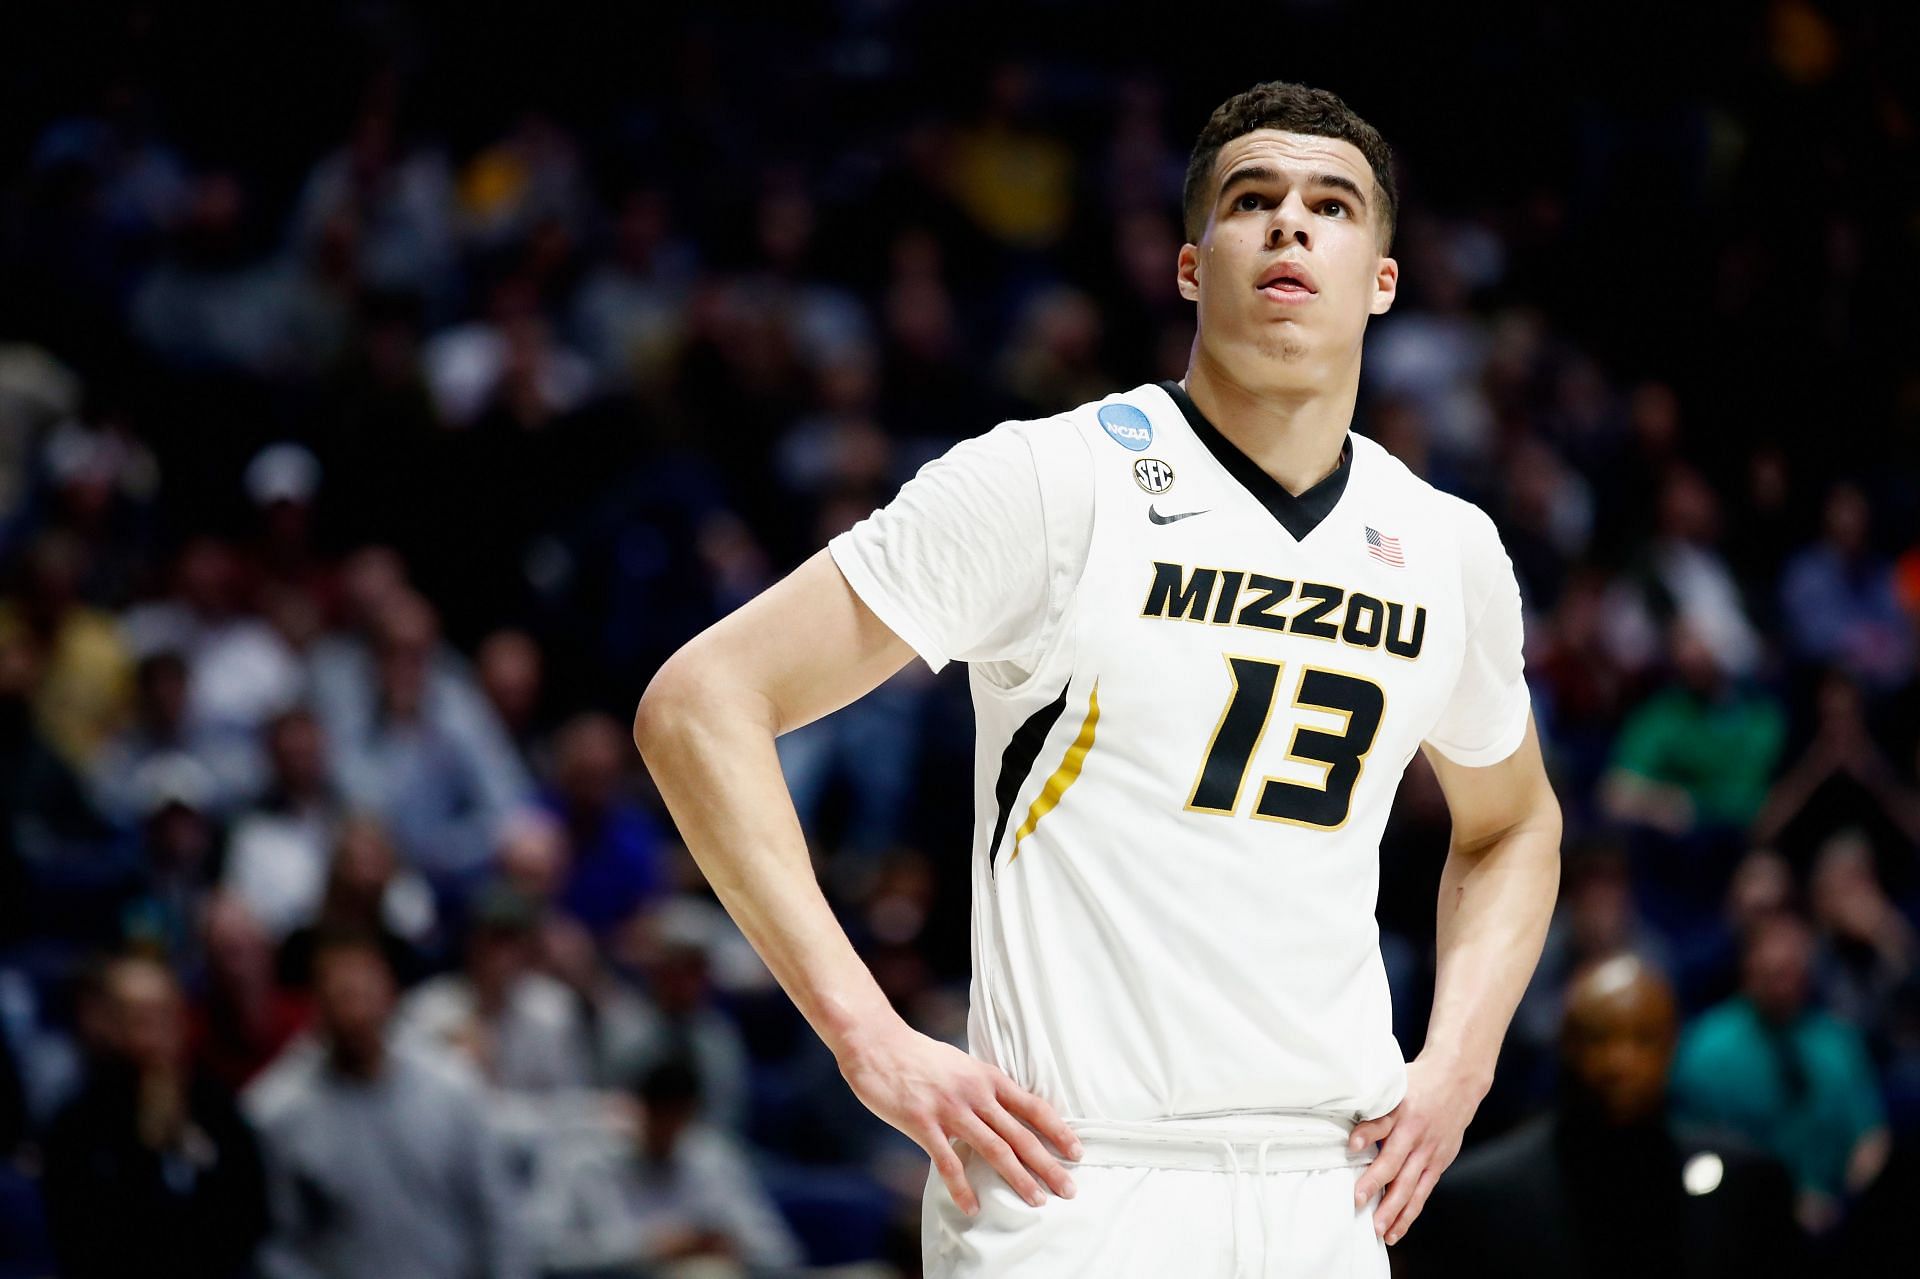 Michael Porter Jr. was injured two minutes into his Missouri debut